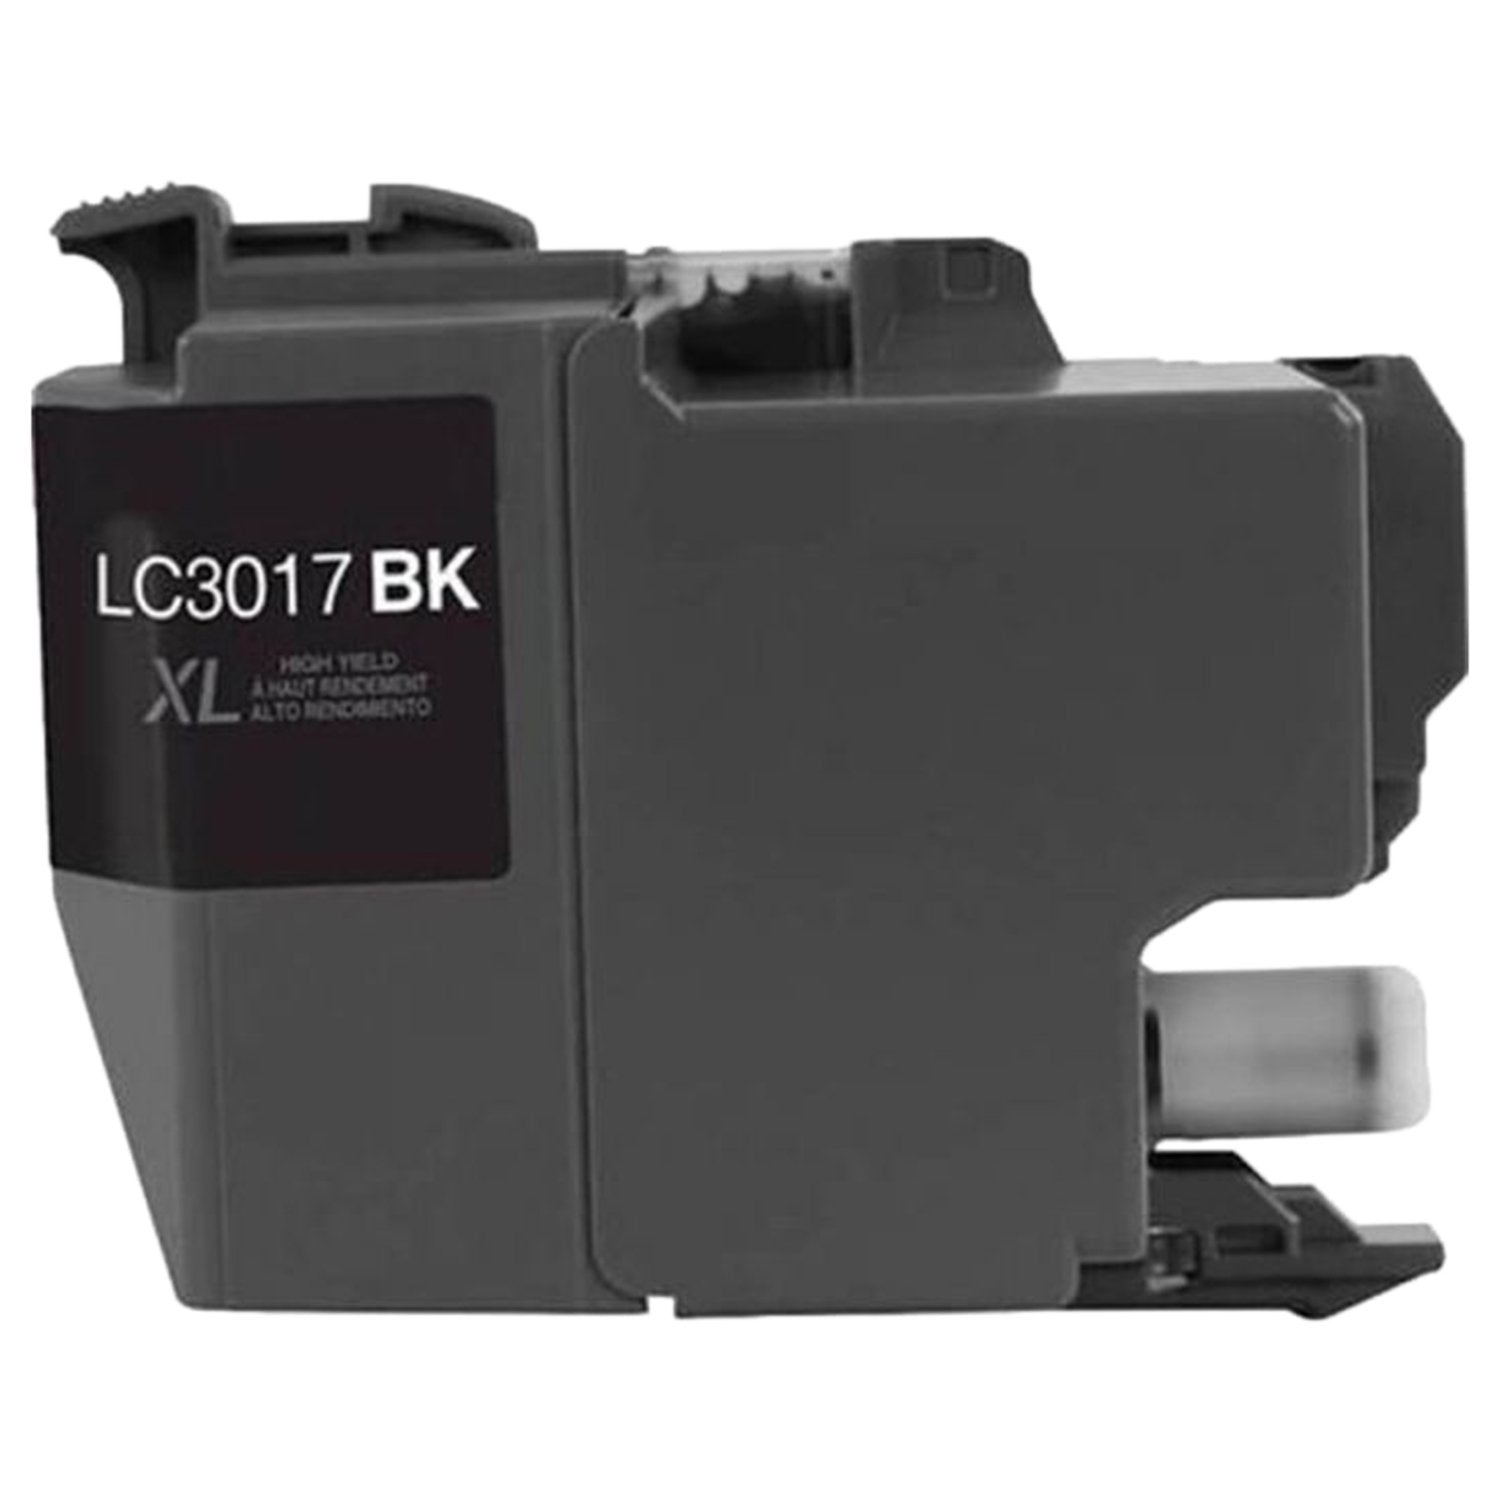 Absolute Toner Compatible Brother LC3017BK Black High Yield Ink Cartridge | Absolute Toner Brother Toner Cartridges